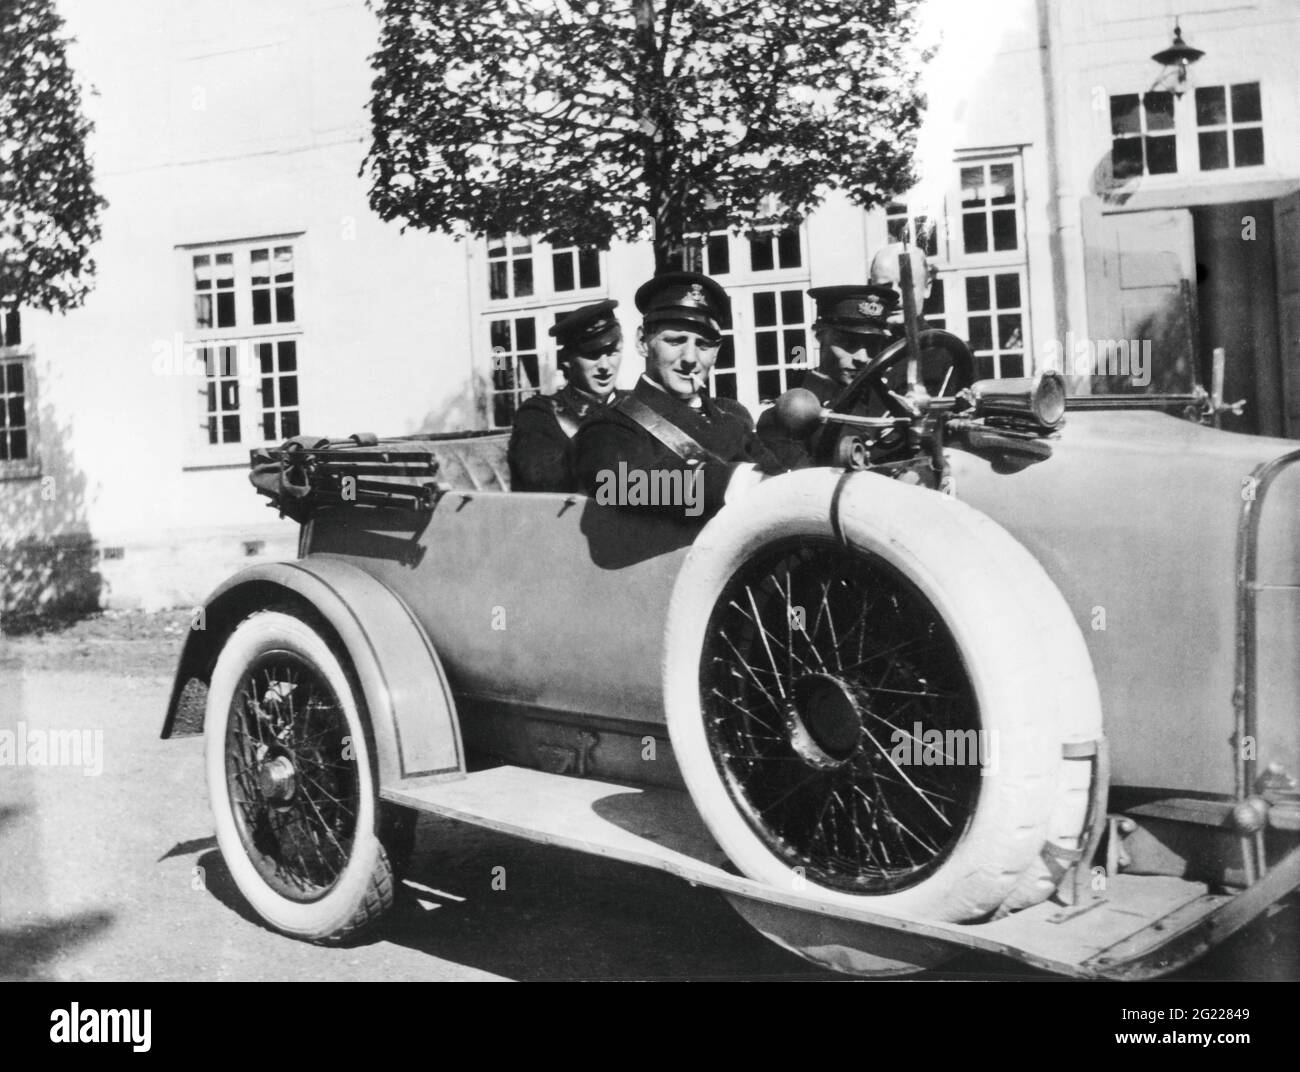 Frederick IX, 11.3.1899 - 14. 1.1972, King of Denmark 1947 - 1972, scene, as prince, in a car, ADDITIONAL-RIGHTS-CLEARANCE-INFO-NOT-AVAILABLE Stock Photo